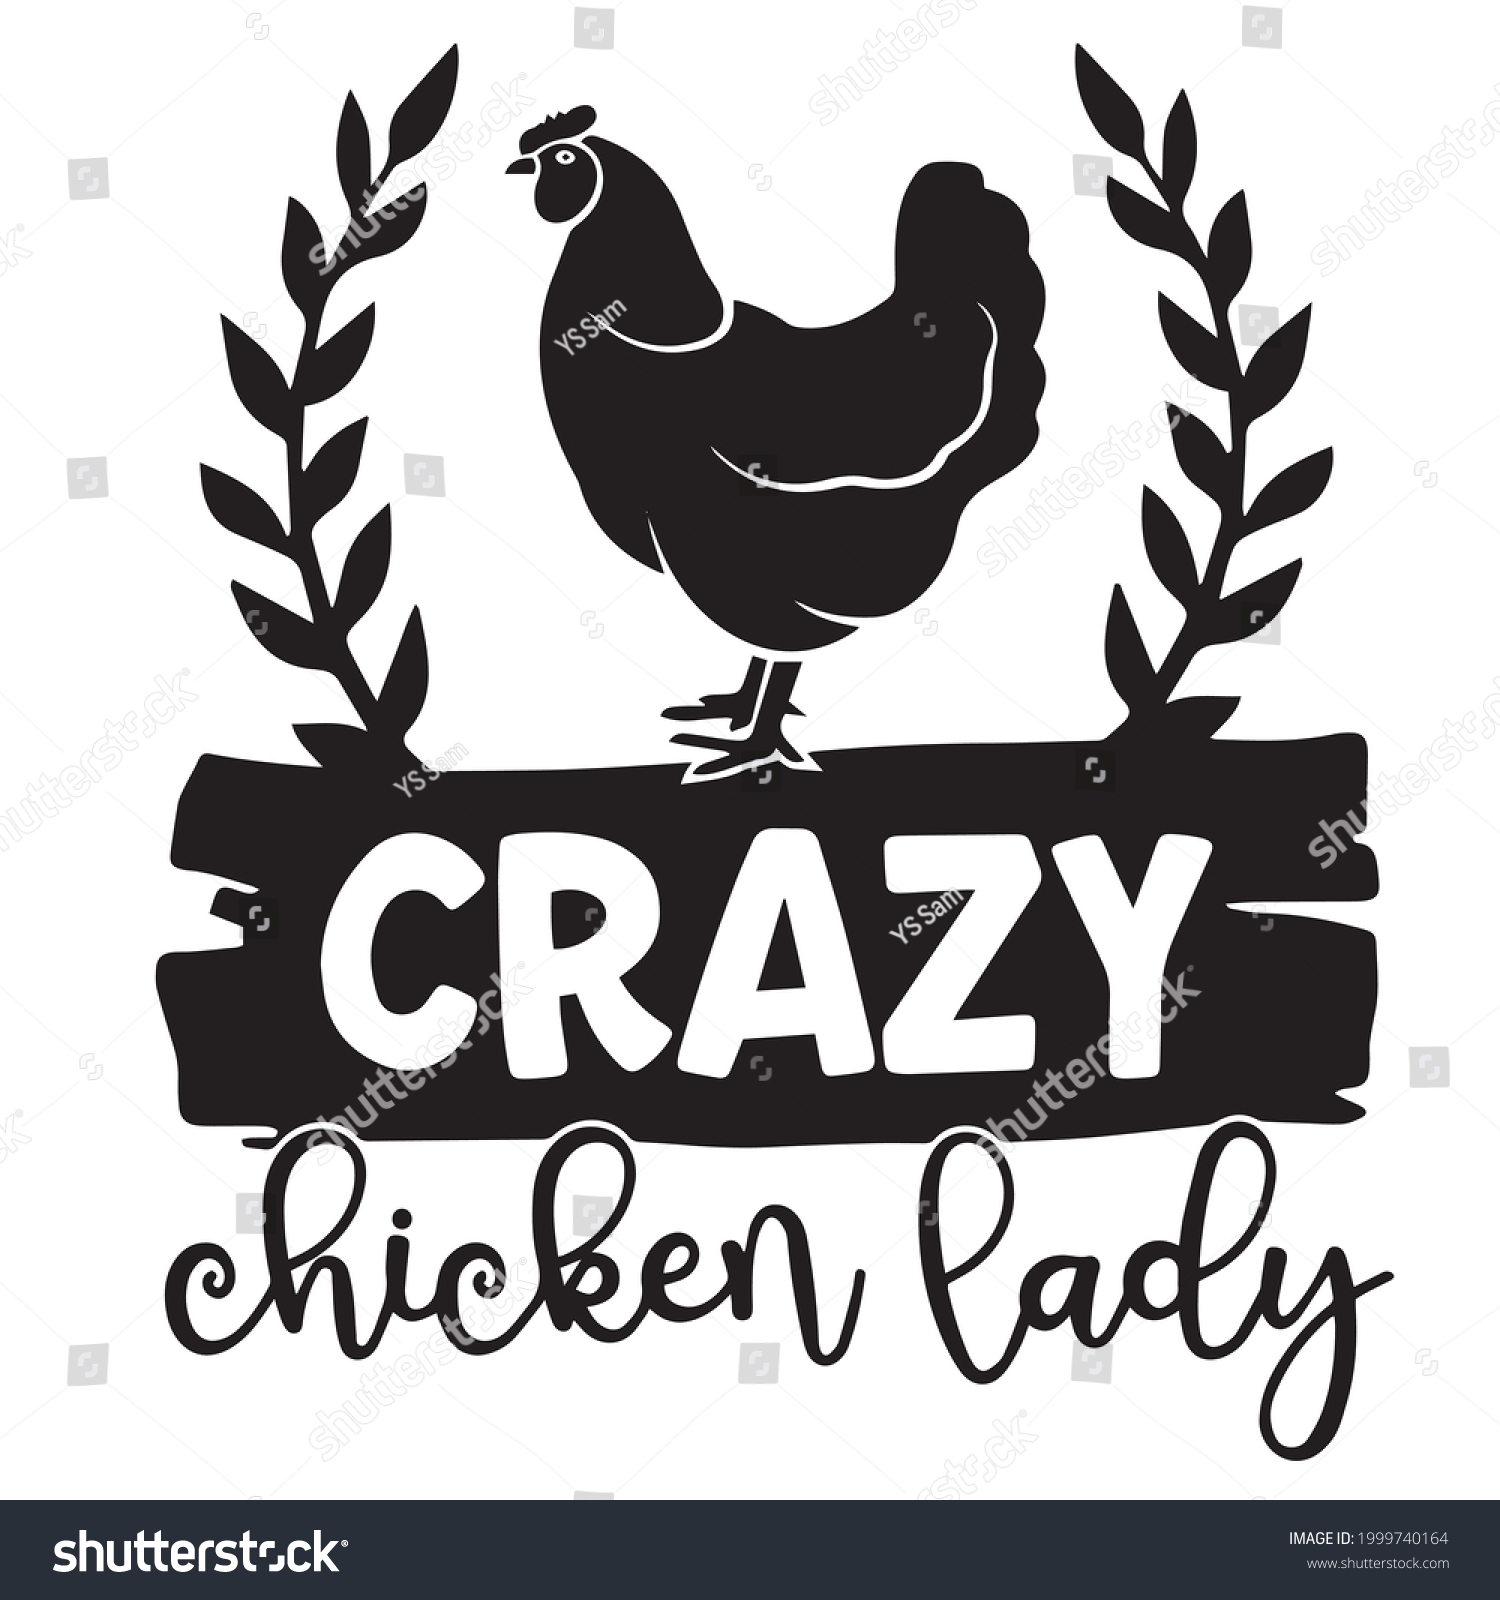 SVG of crazy chicken lady logo inspirational positive quotes, motivational, typography, lettering design svg